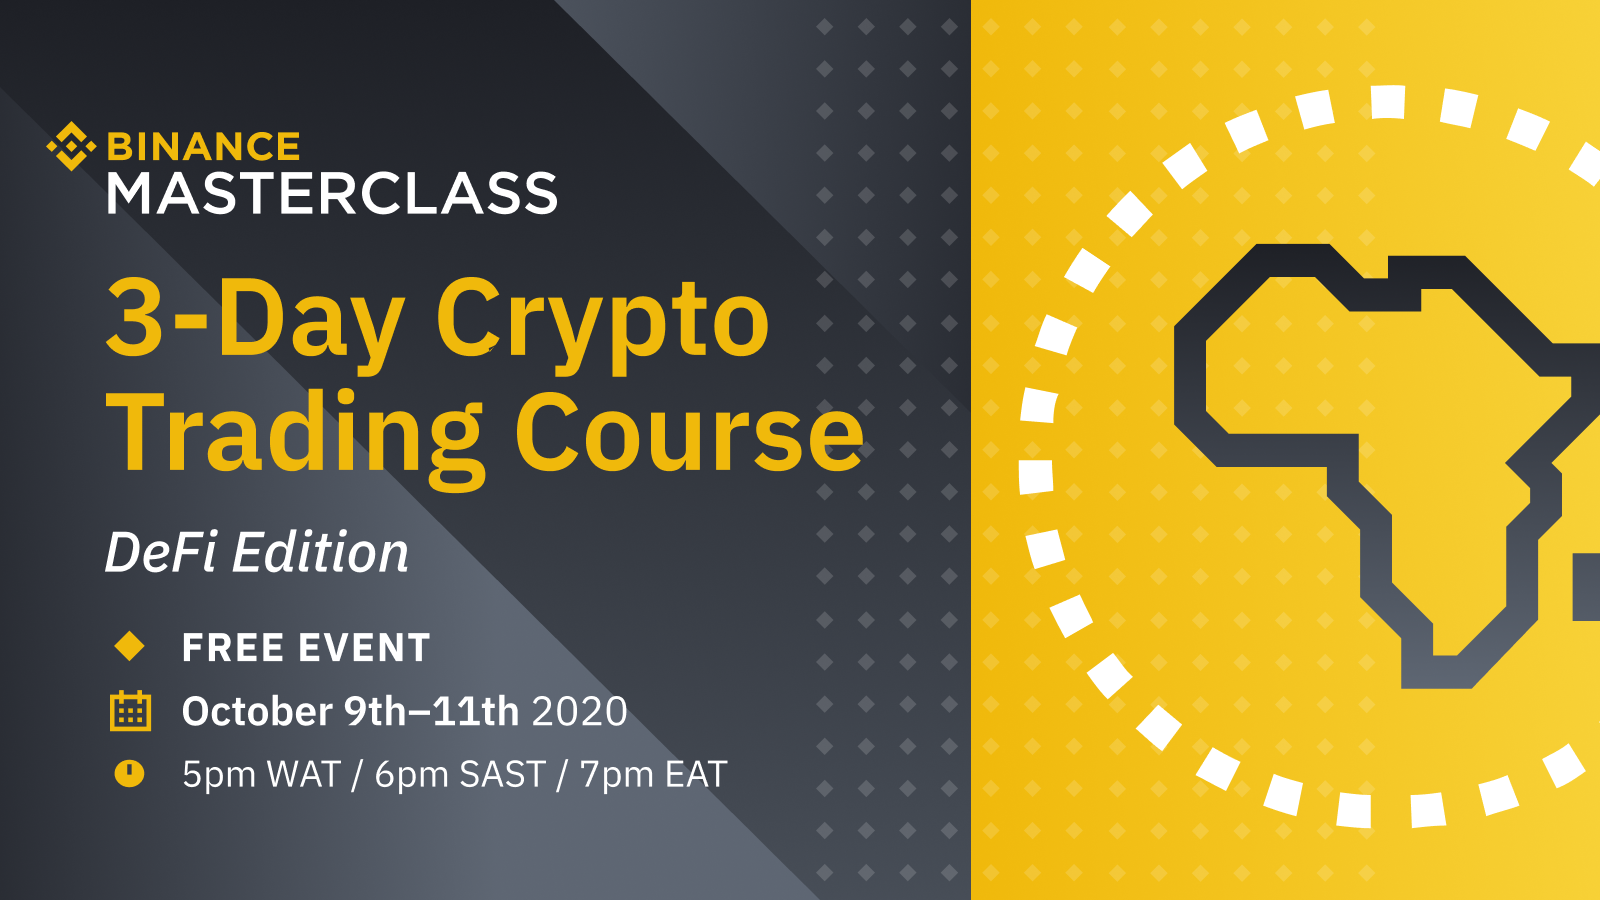 Binance, the world’s largest cryptocurrency exchange is running a​ FREE​ three-day crypto trading masterclass (with a focus on DeFi)